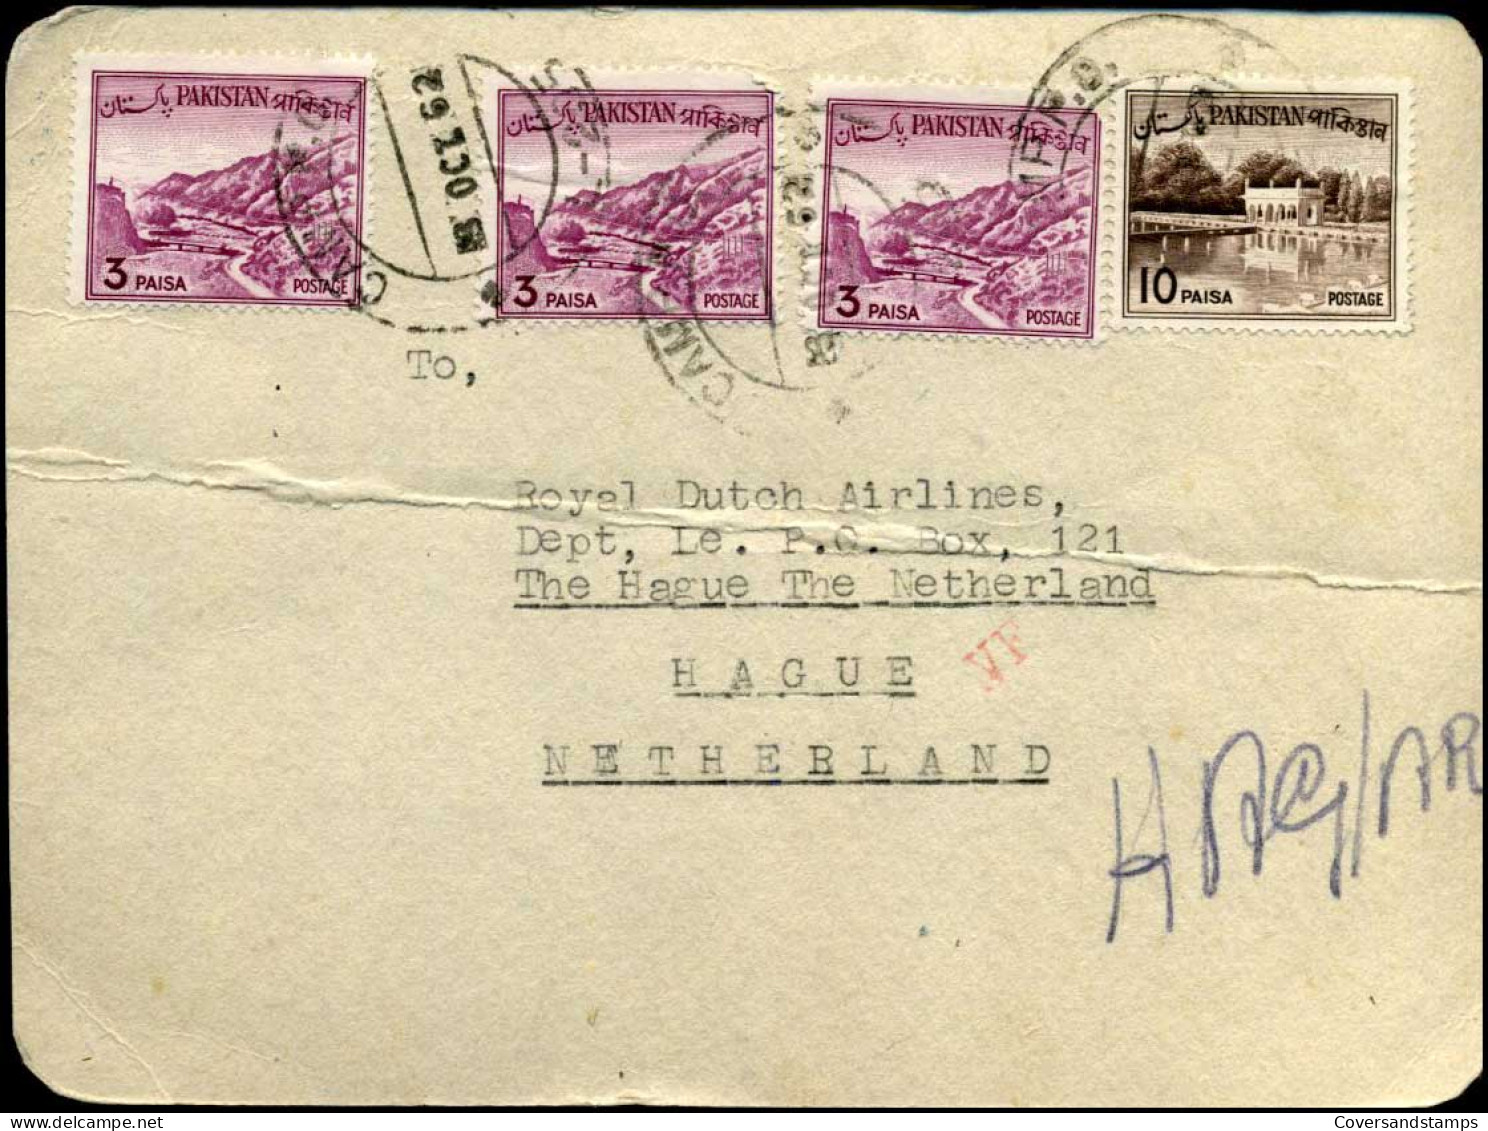 Post Card To The Hague, Netherlands - Pakistan